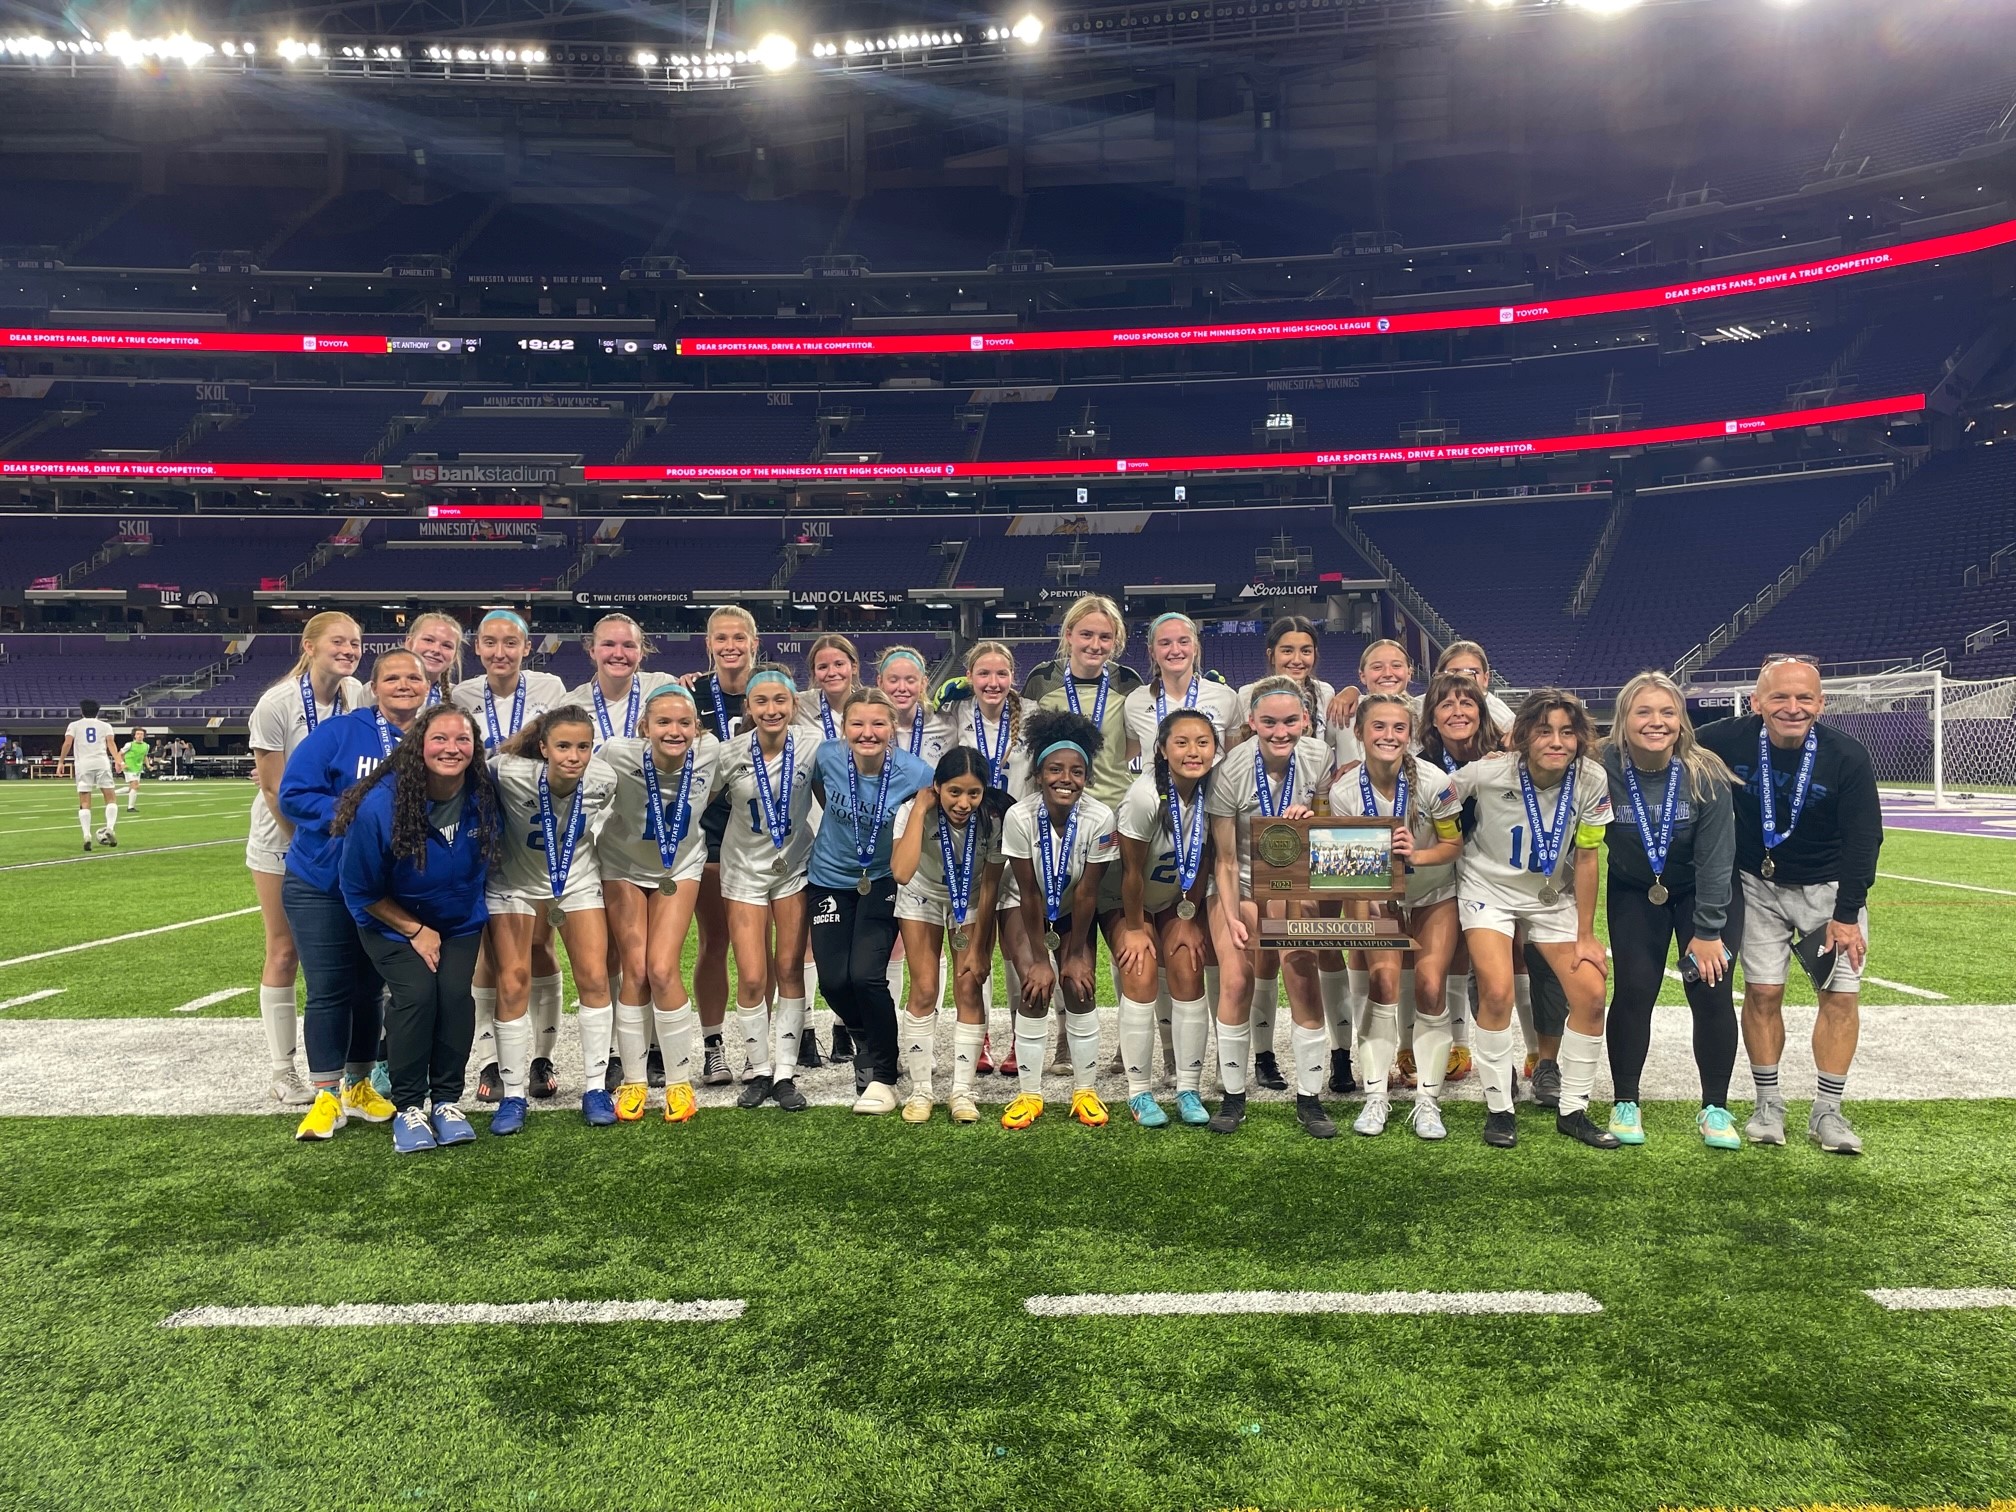 St. Anthony Village made school history with its first-ever title in a girls athletic activity following a 3-2 victory over St. Paul Academy.